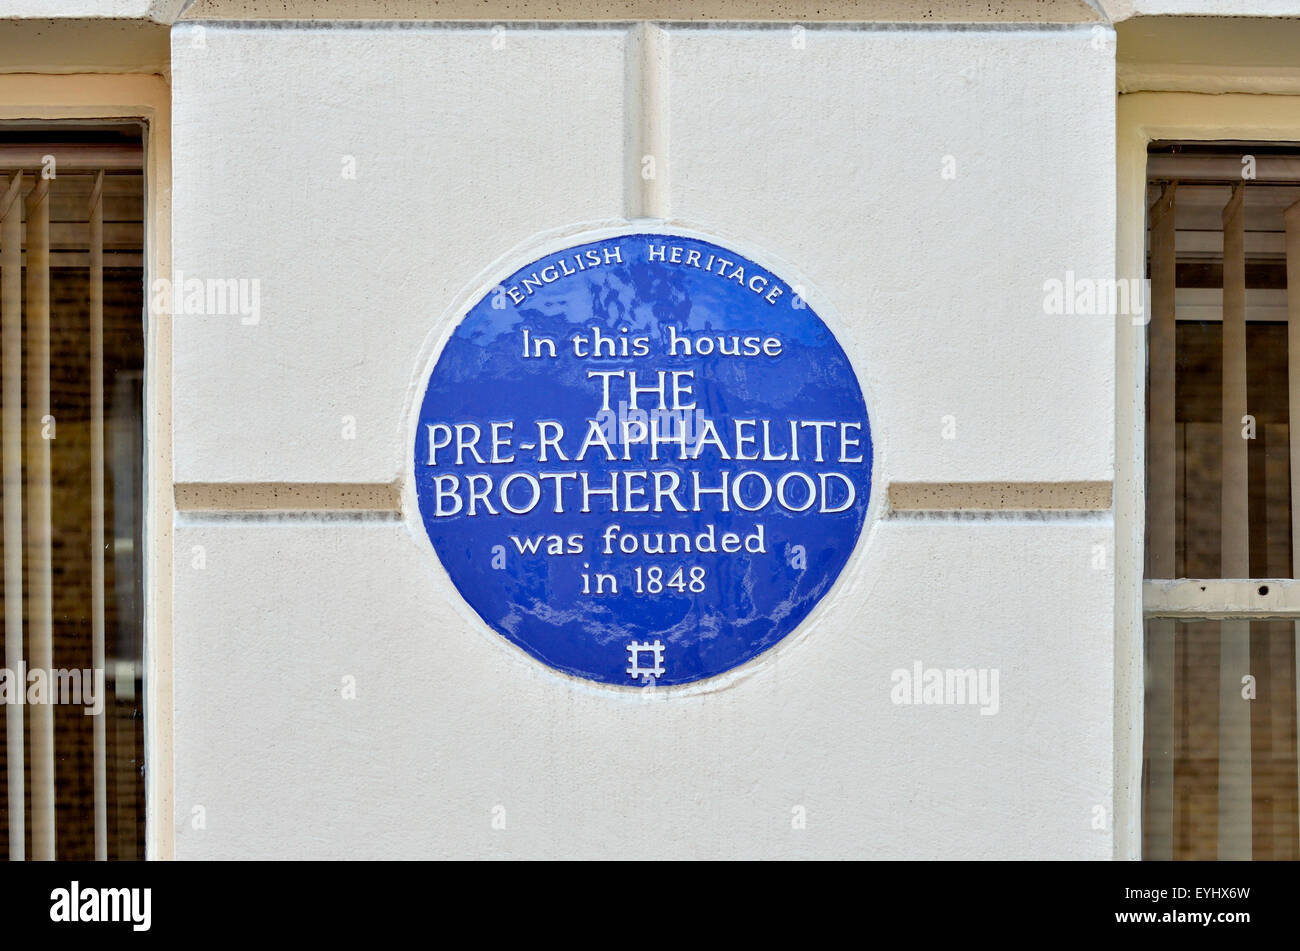 London, England, UK. Blue plaque at 7 Gower Street, Camden. 'In this house THE PRE-RAPHAELITE BROTHERHOOD was founded in 1848' Stock Photo